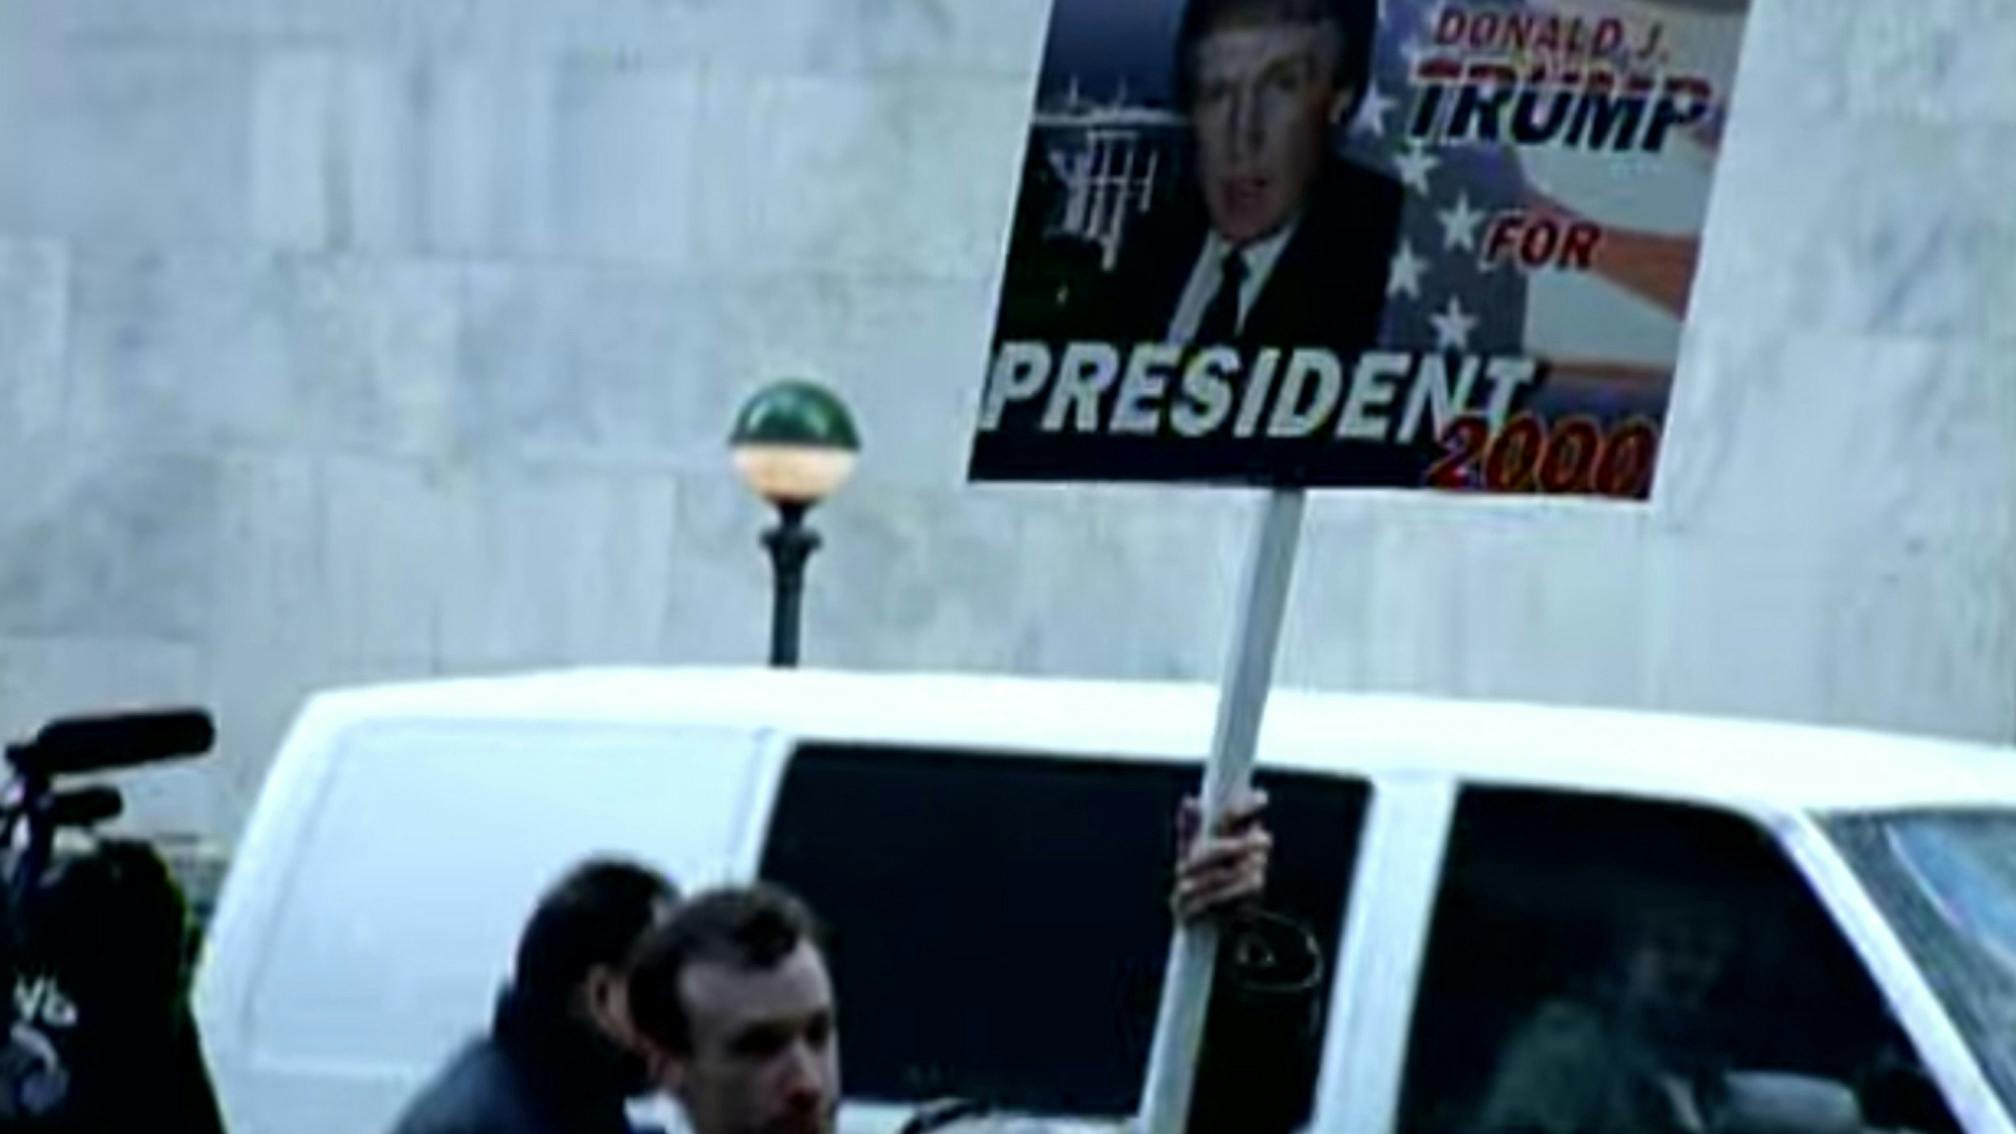 Tom Morello Comments On The 'Trump For President' Sign In RATM's Sleep Now In The Fire Video